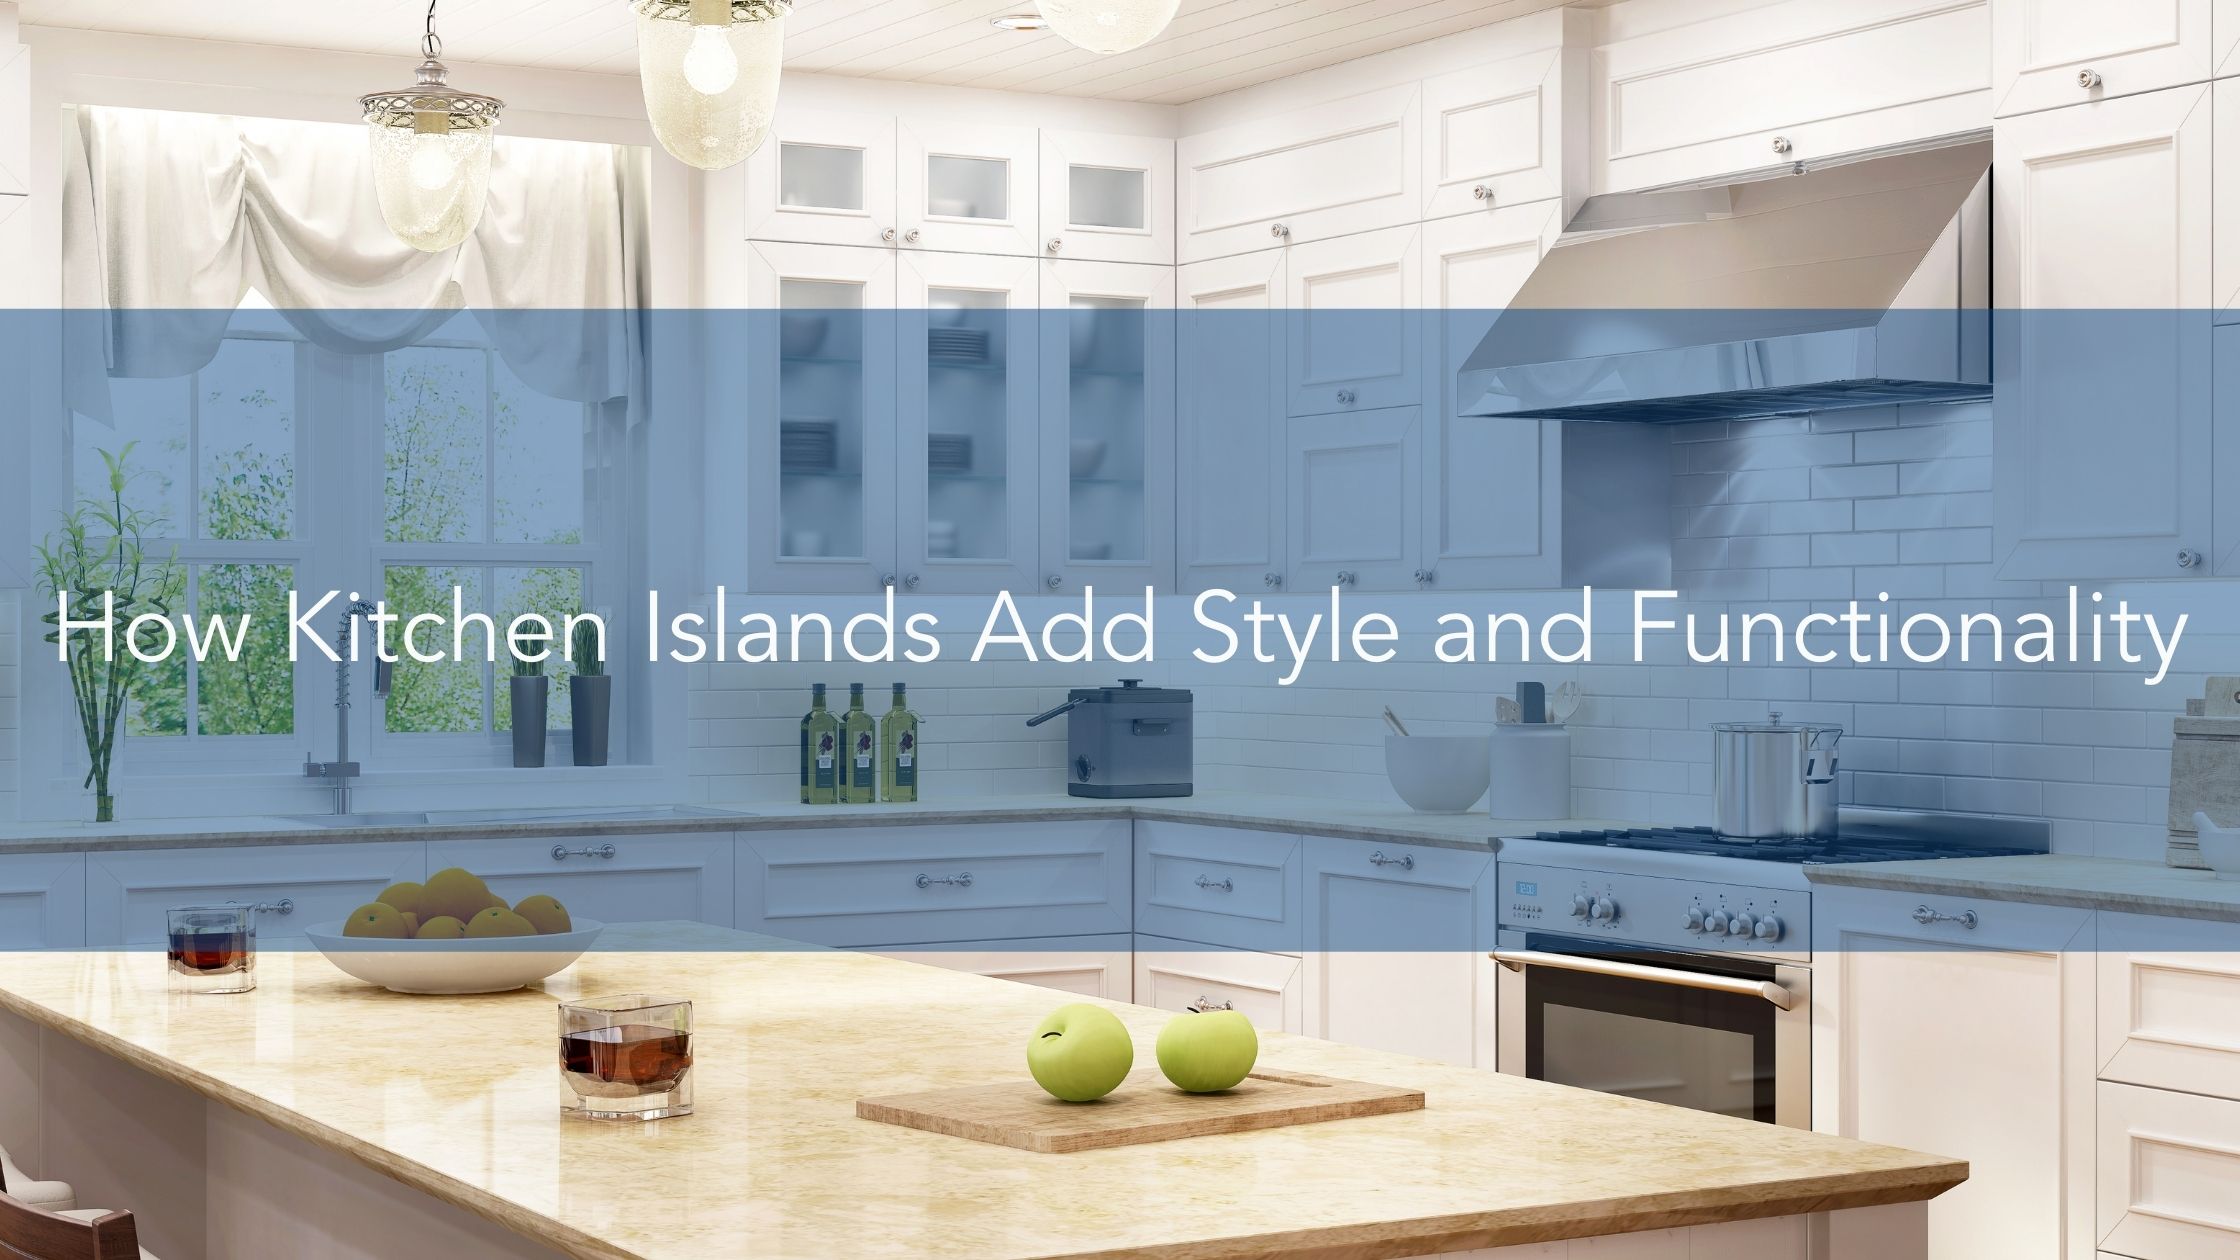 How Kitchen Islands Add Style and Functionality